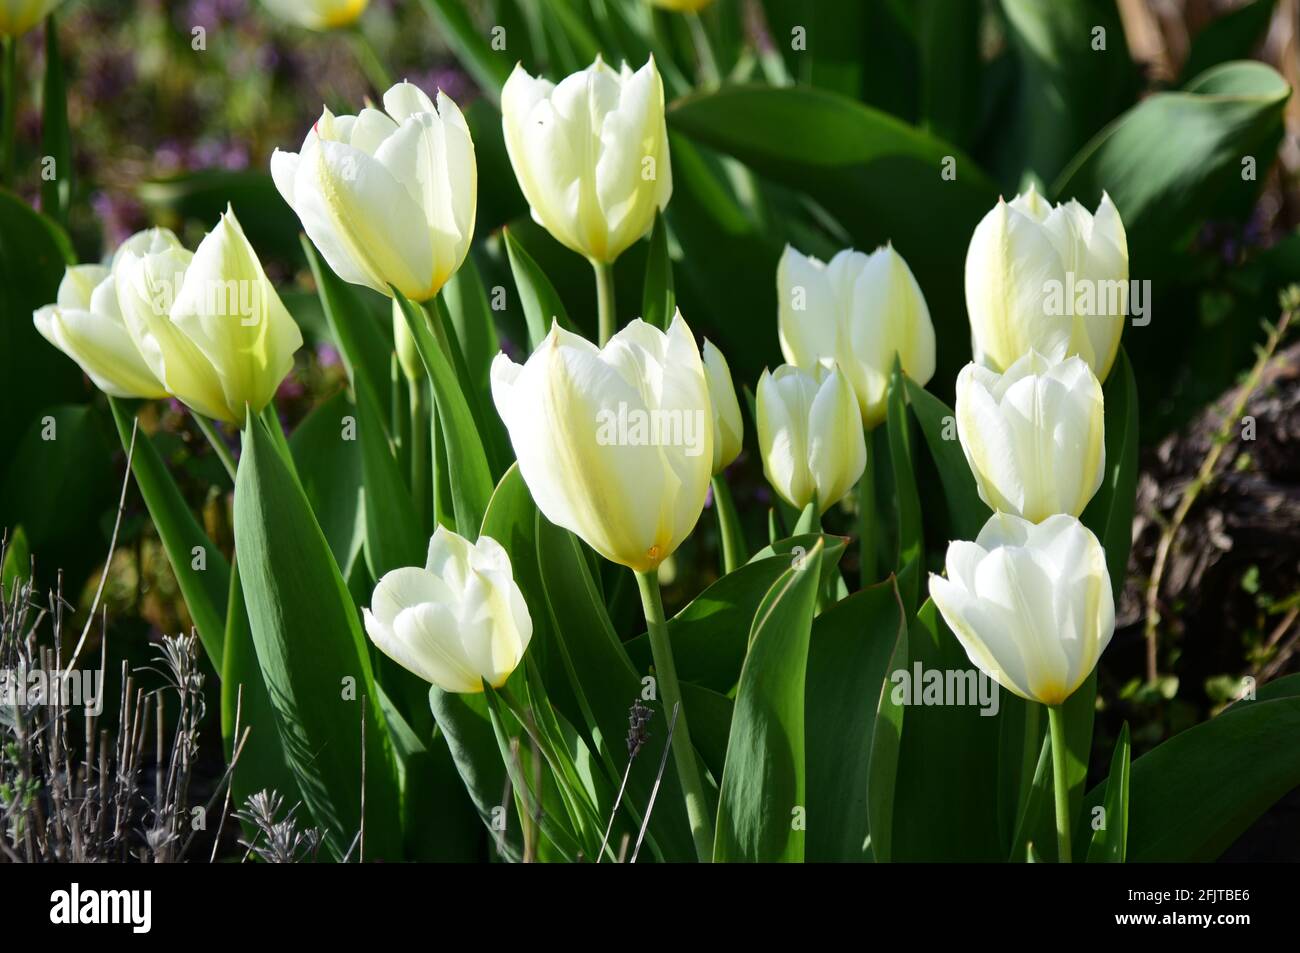 White tulips blooming in the garden on a sunny spring day Stock Photo